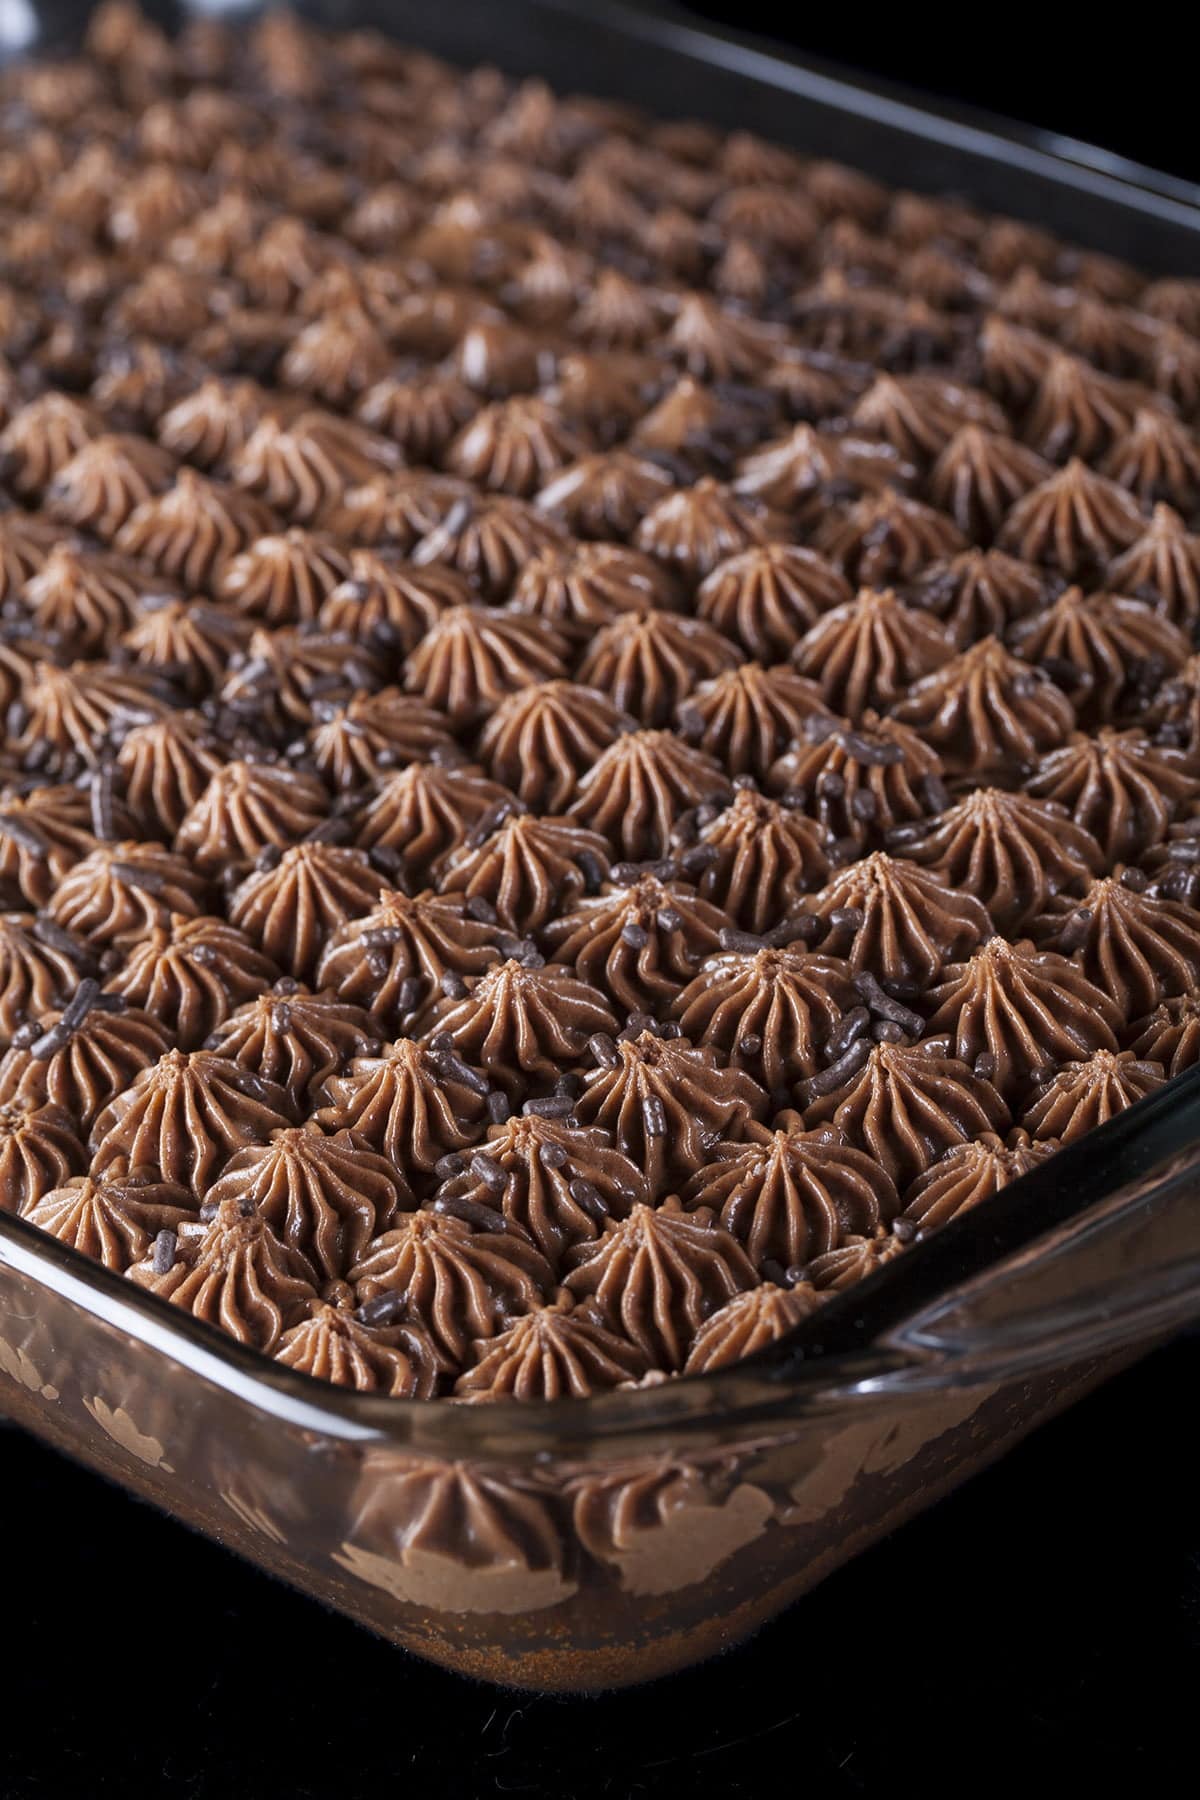 Close up view of a chocolate cake with stars of chocolate frosting on top - Homemade Deep N Delicious cake, accurate to the source material!